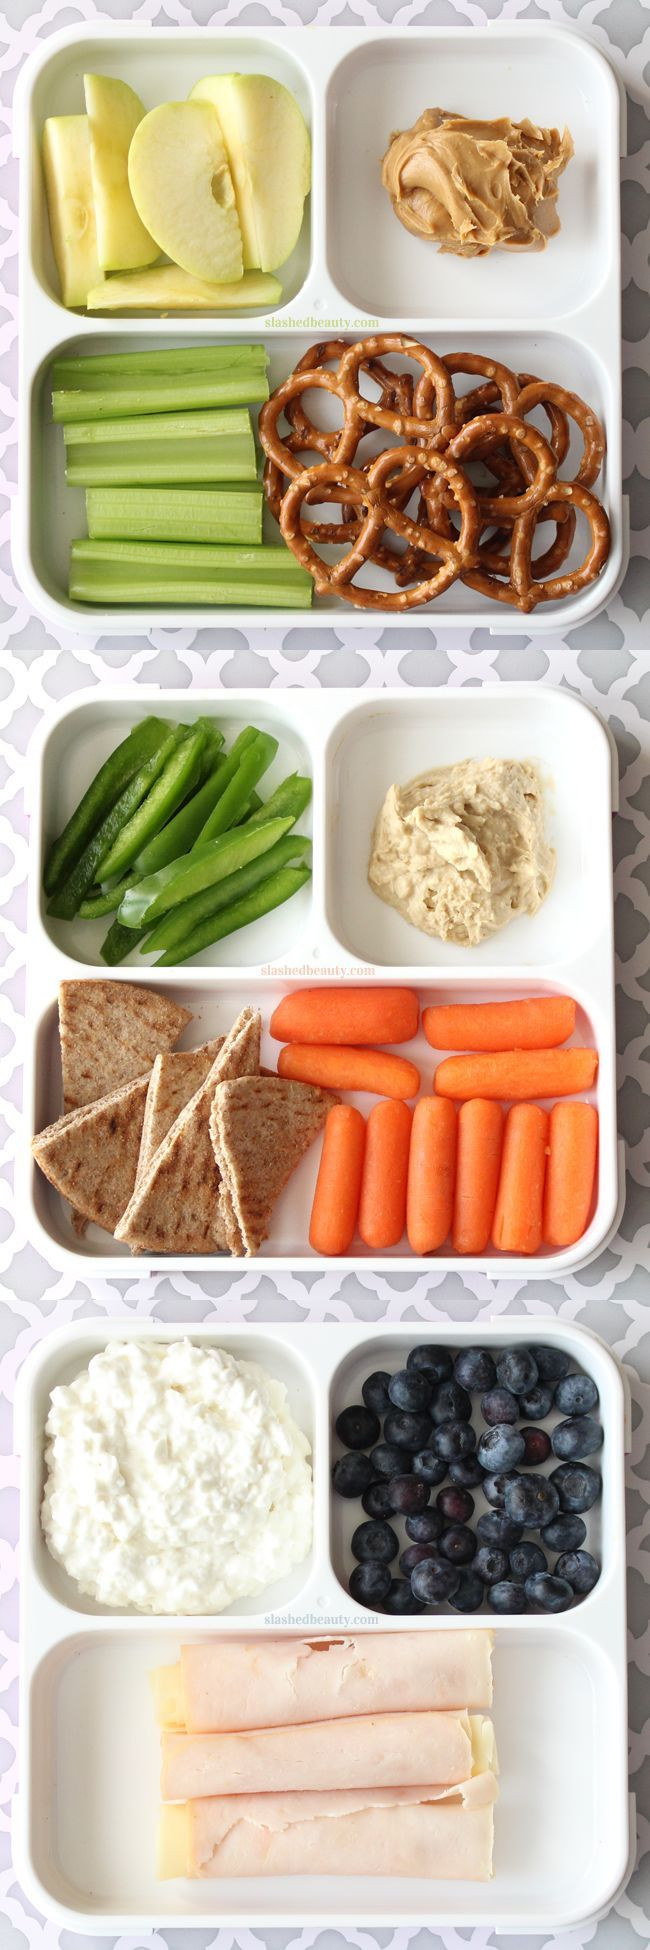 Top Healthy Snacks
 549 best images about Healthy Snacks For Kids on Pinterest